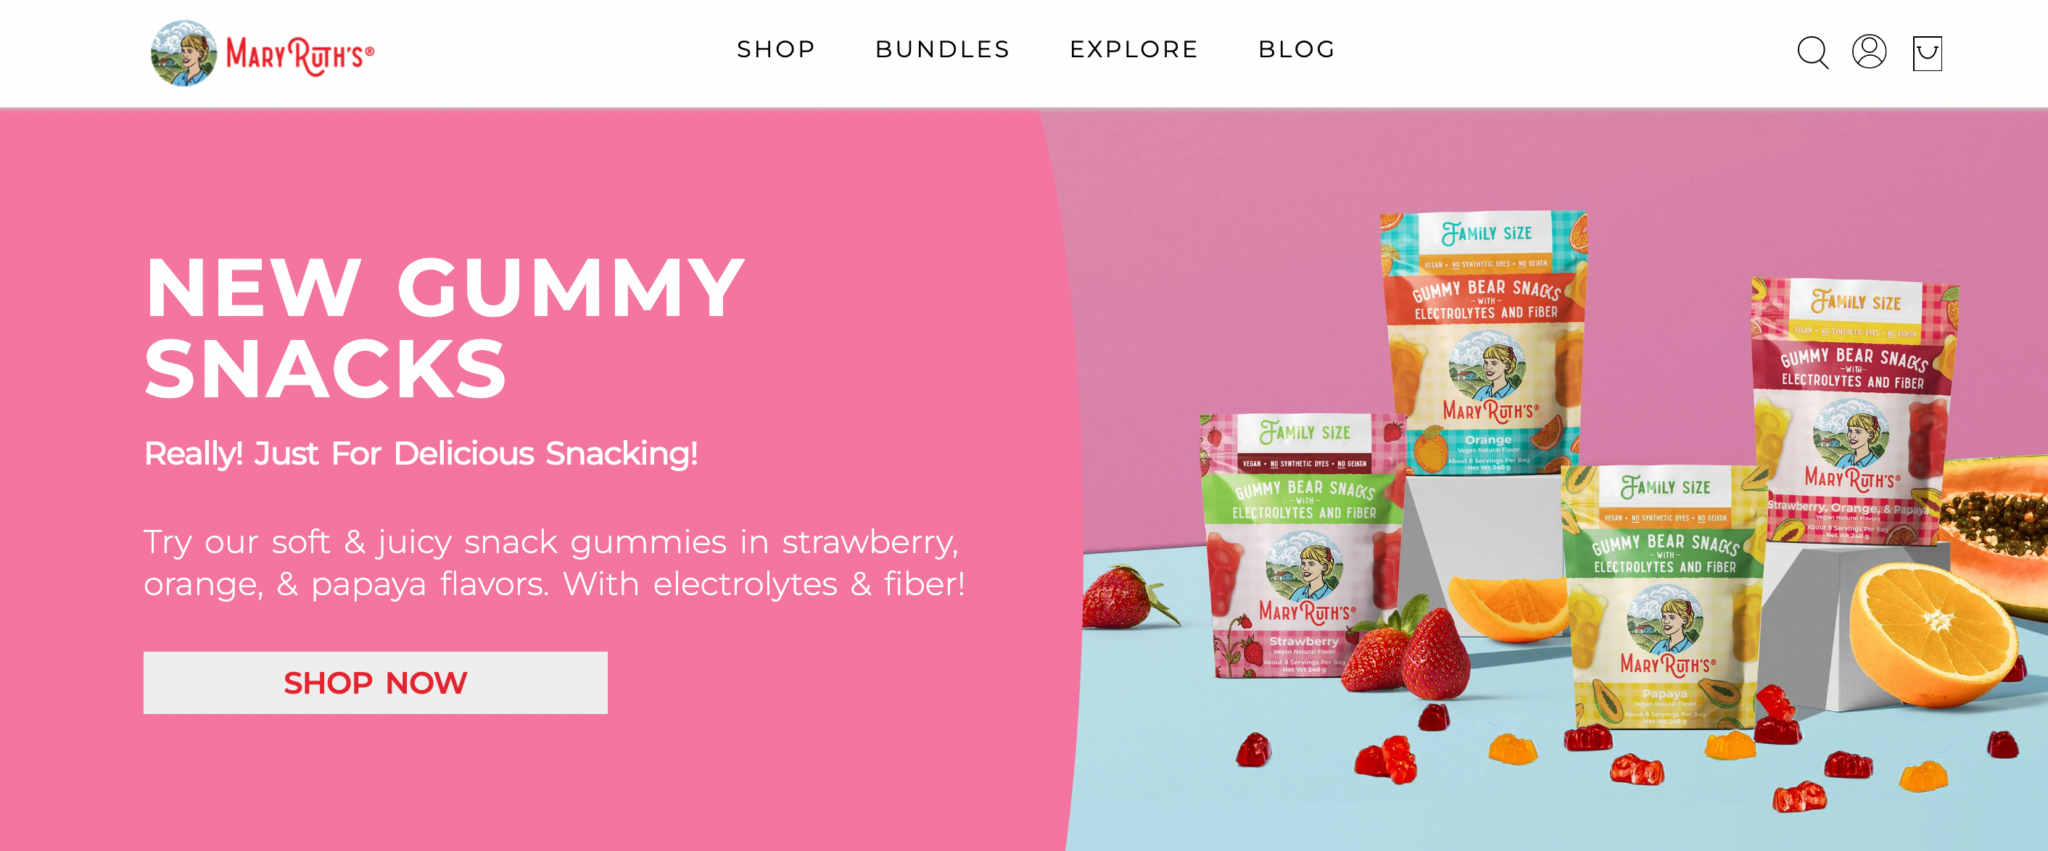 A screenshot of Mary Ruth Organics website showing a banner with New Gummy Snacks.